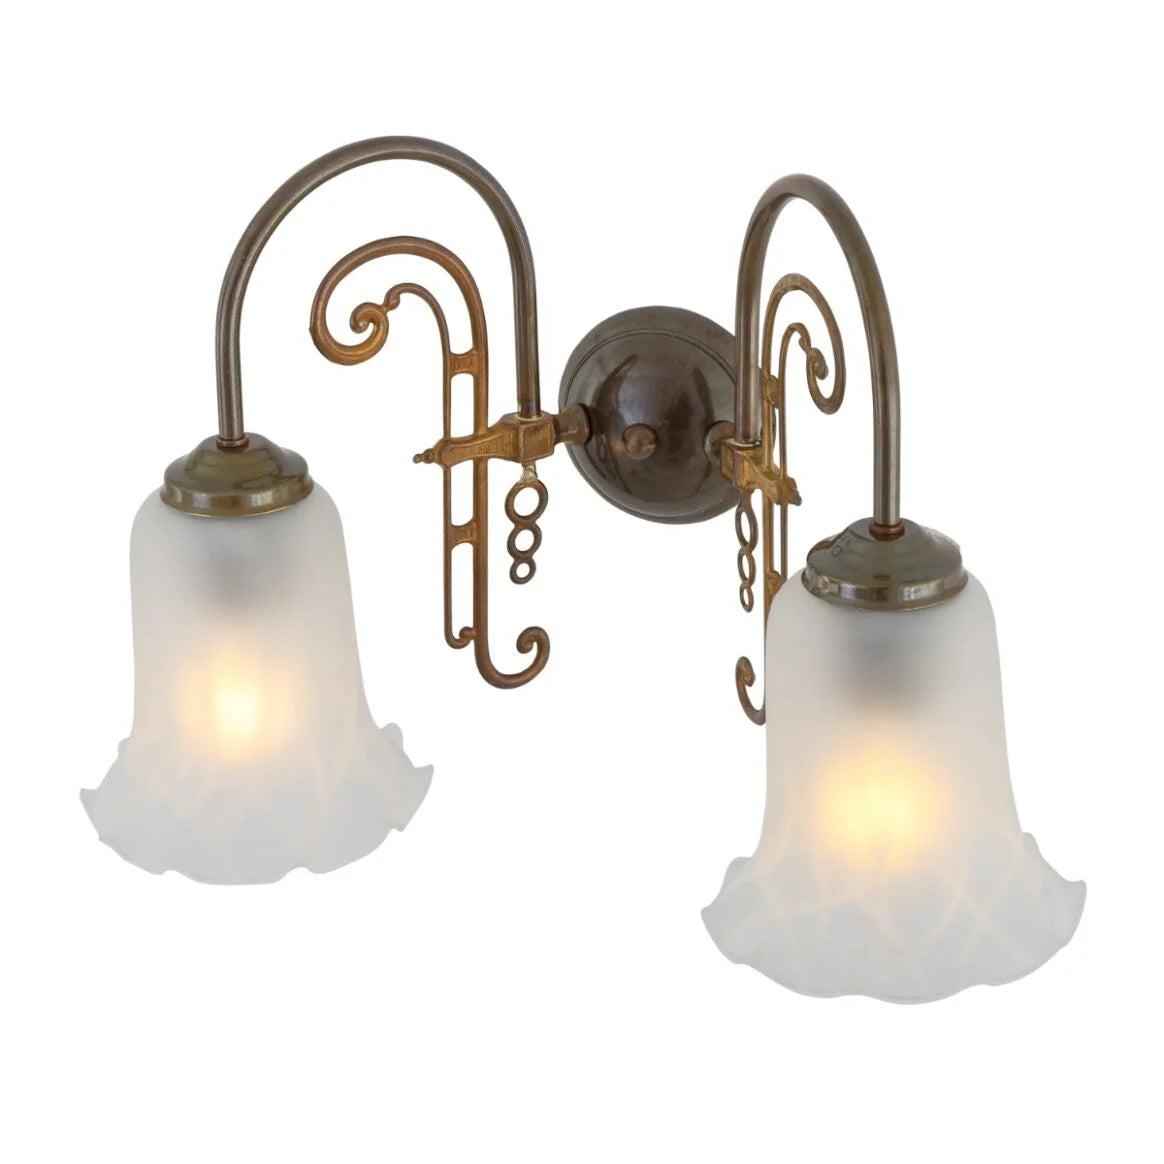 Medan Two-Arm Ornate Brass Wall Light with Etched Glass Shades